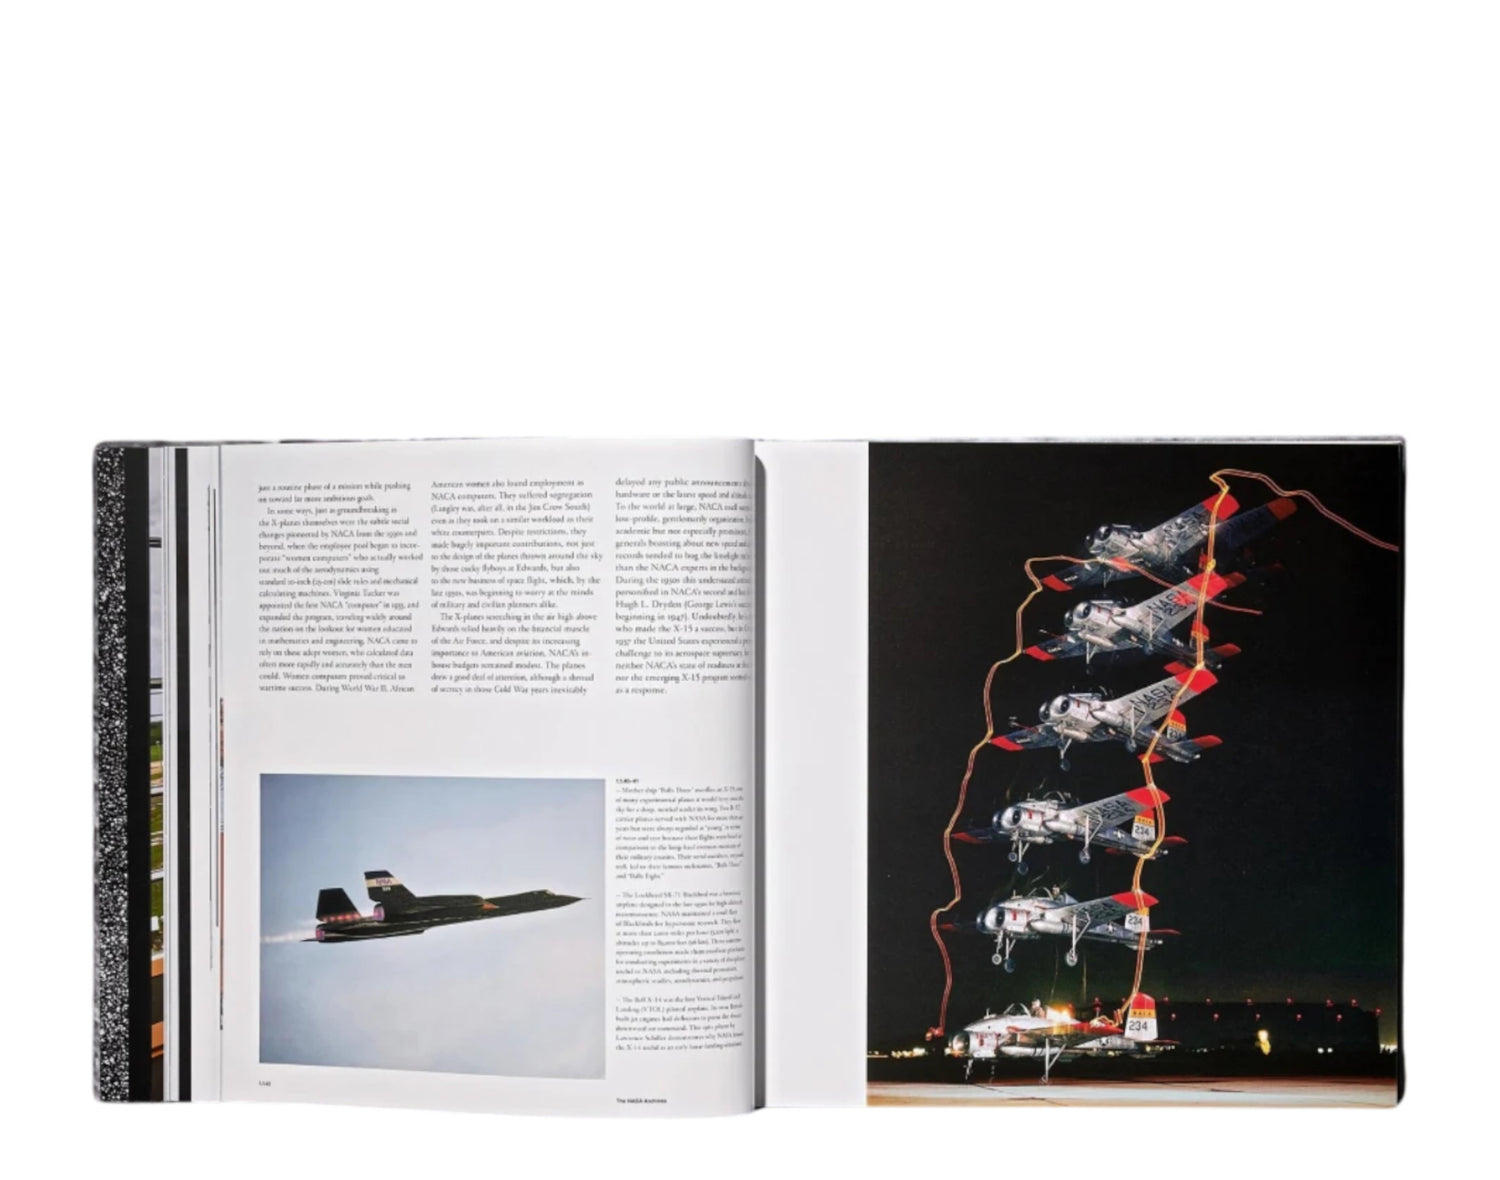 Taschen Books - The NASA Archives. 60 Years in Space Hardcover Book